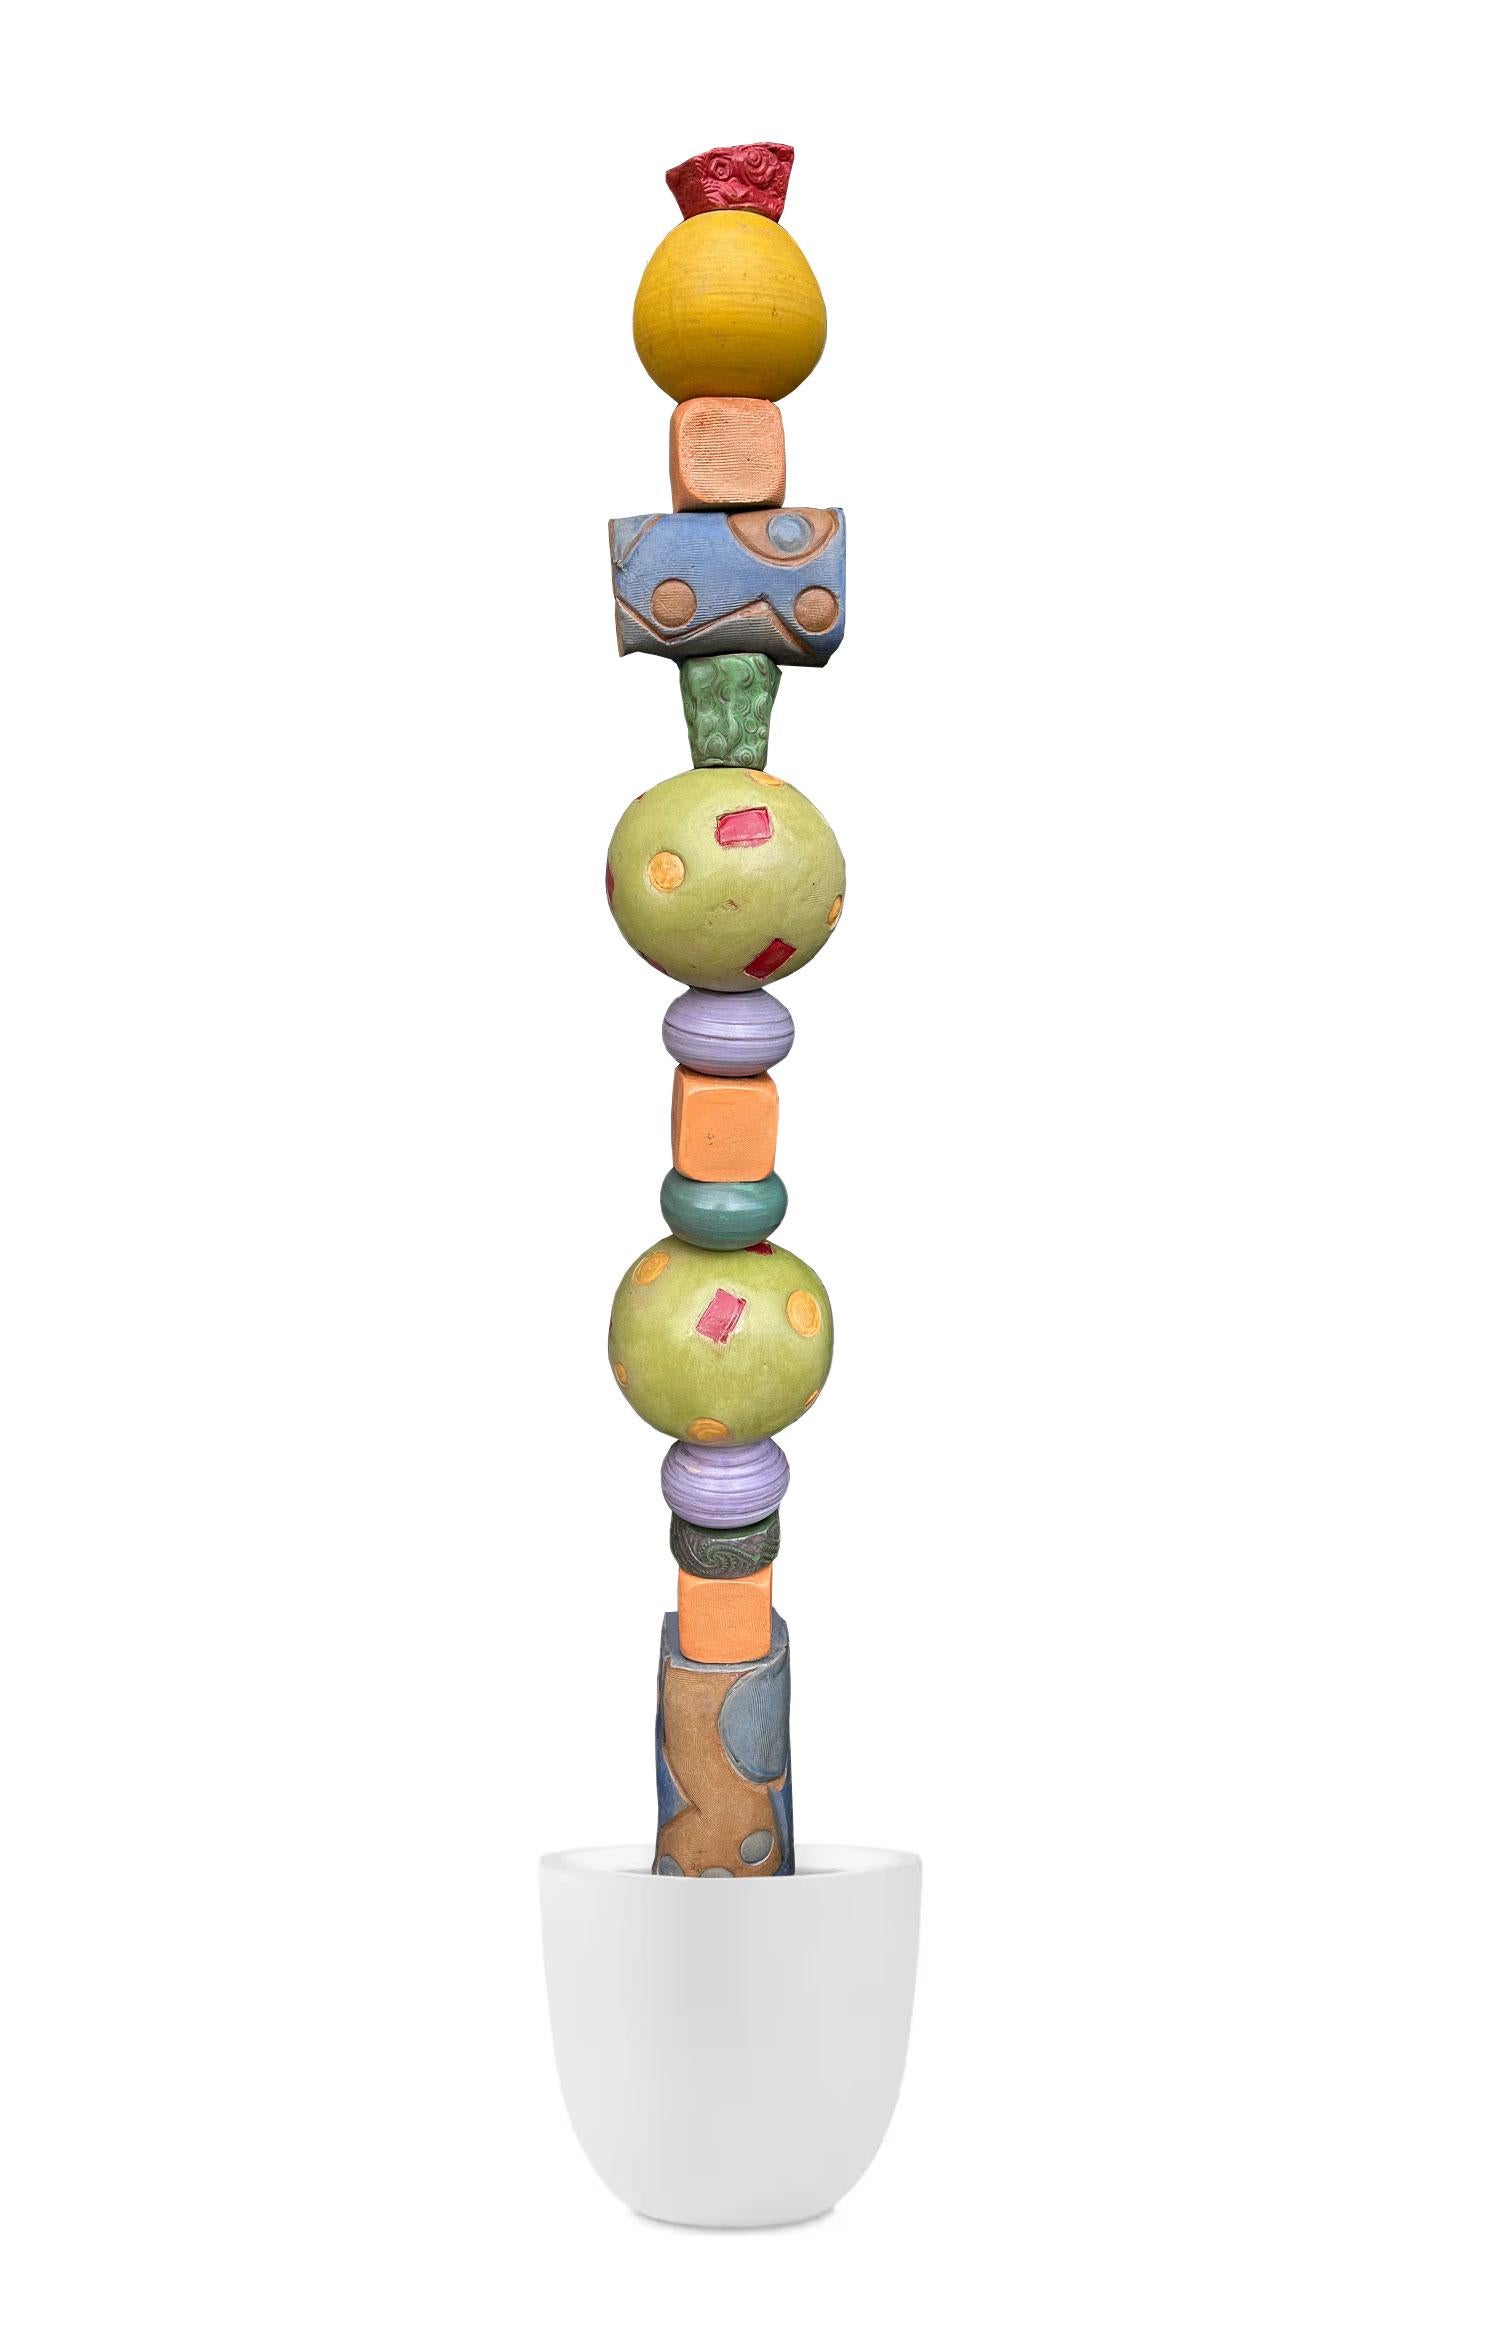 Abstract Totem - Glazed Ceramic Sculpture For Outdoor Garden or Indoors - Art by Marc Zimmerman